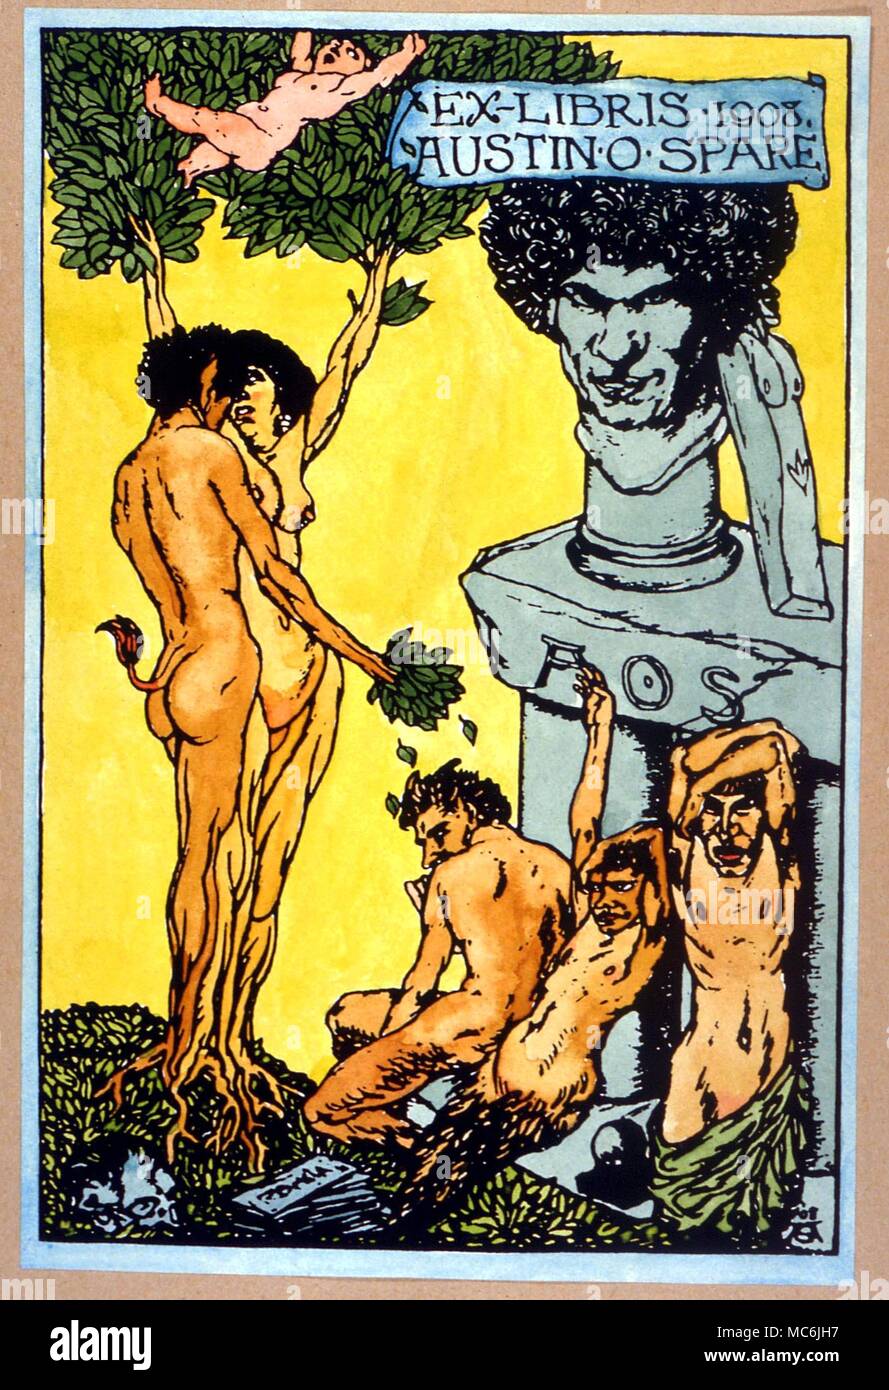 OCCULTISTS - AUSTIN SPARE Bust self-portrait of the artist Austin Osman Spare (1886-1956) surrounded by various nymphs and satyrs. Spare's own Ex Libris, hand-coloured. private collection Stock Photo